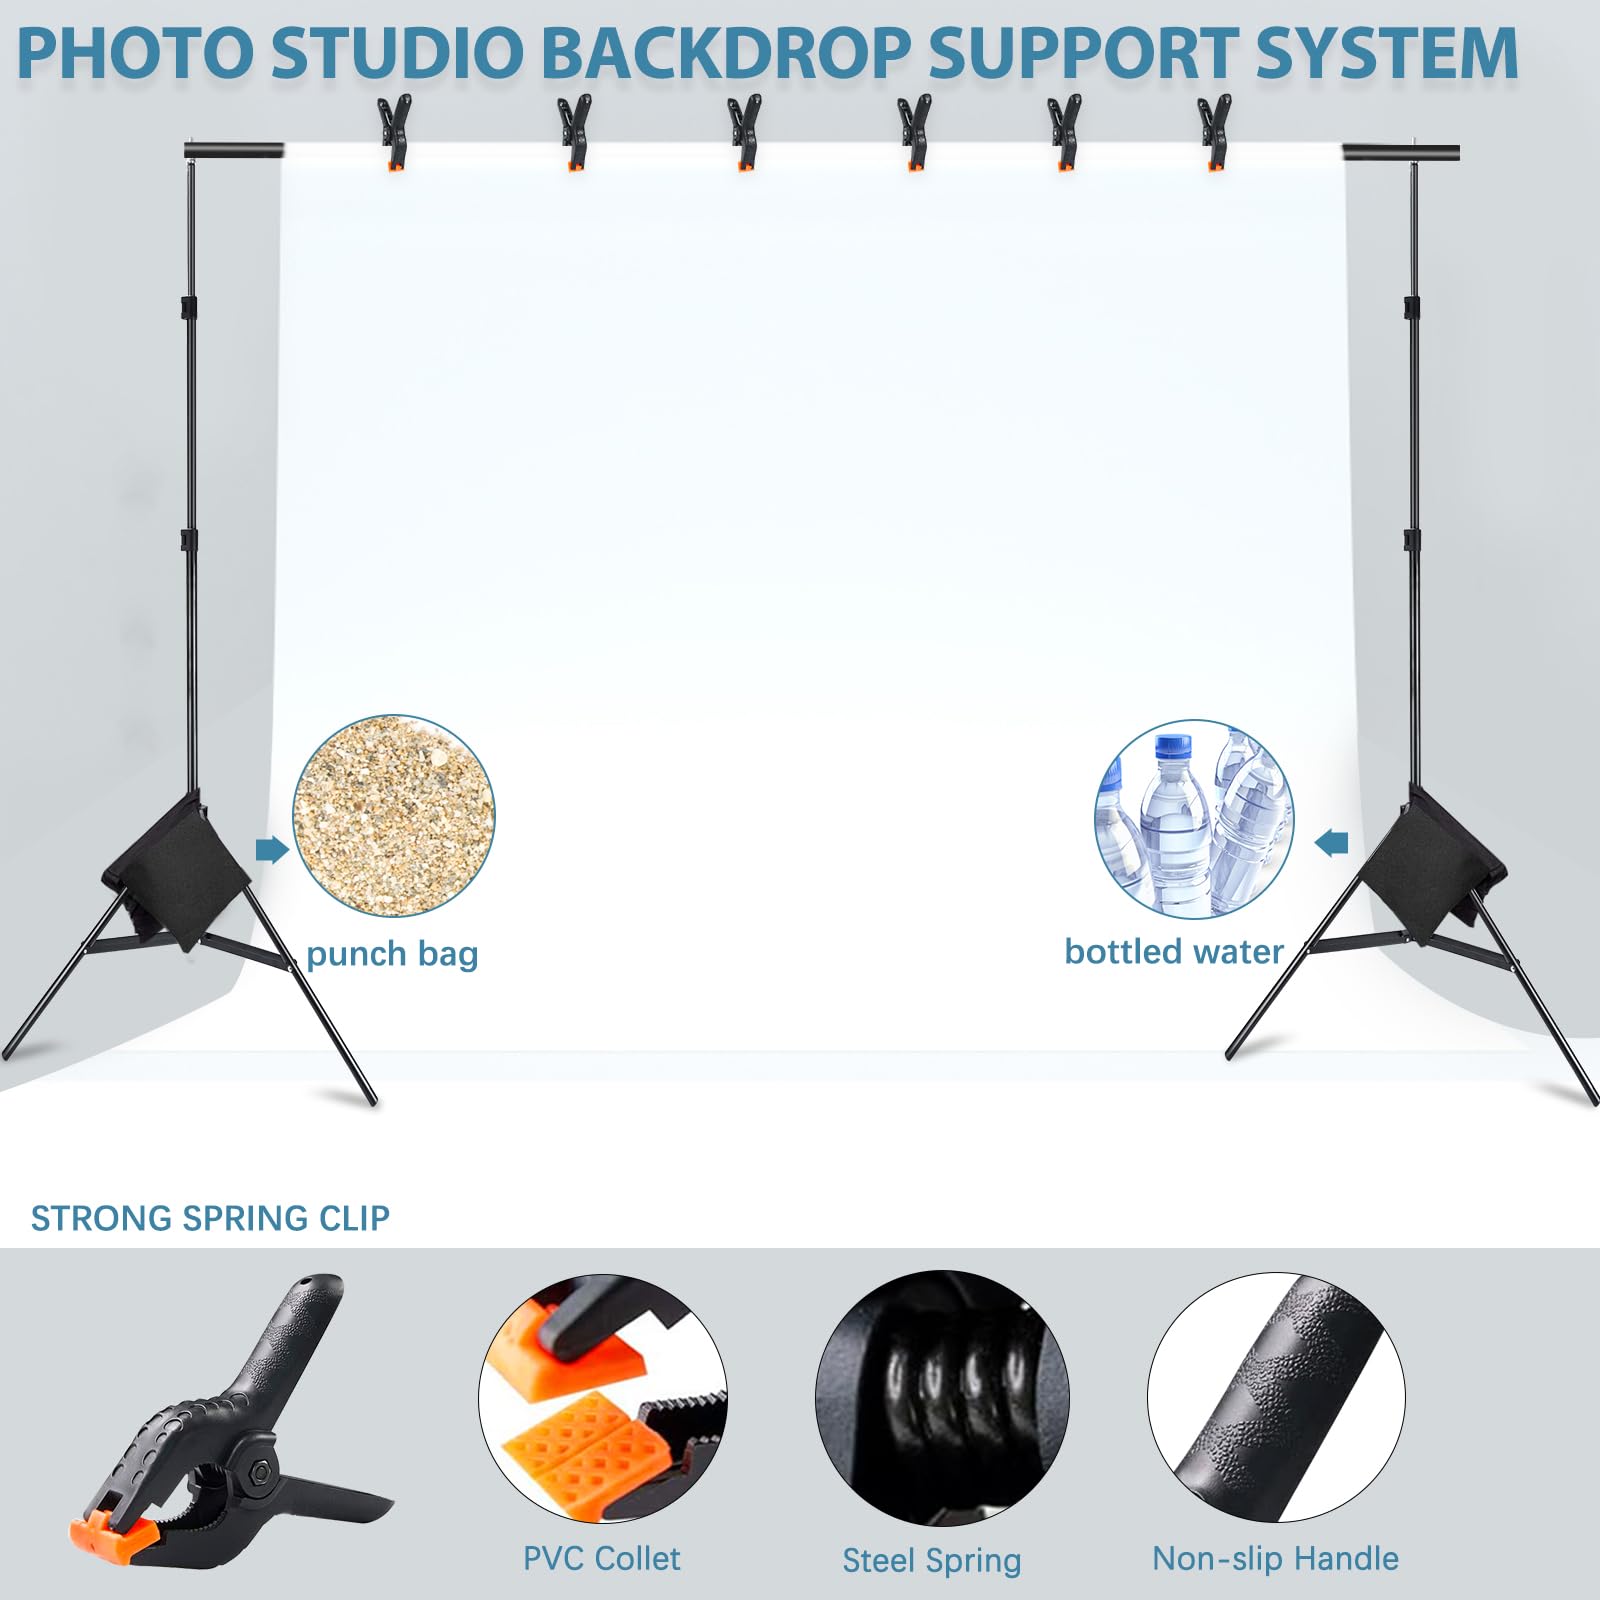 LDGHO Photo Video Studio 10x7Ft (WxH) Adjustable Background Stand Backdrop Support System Kit with Carry Bag